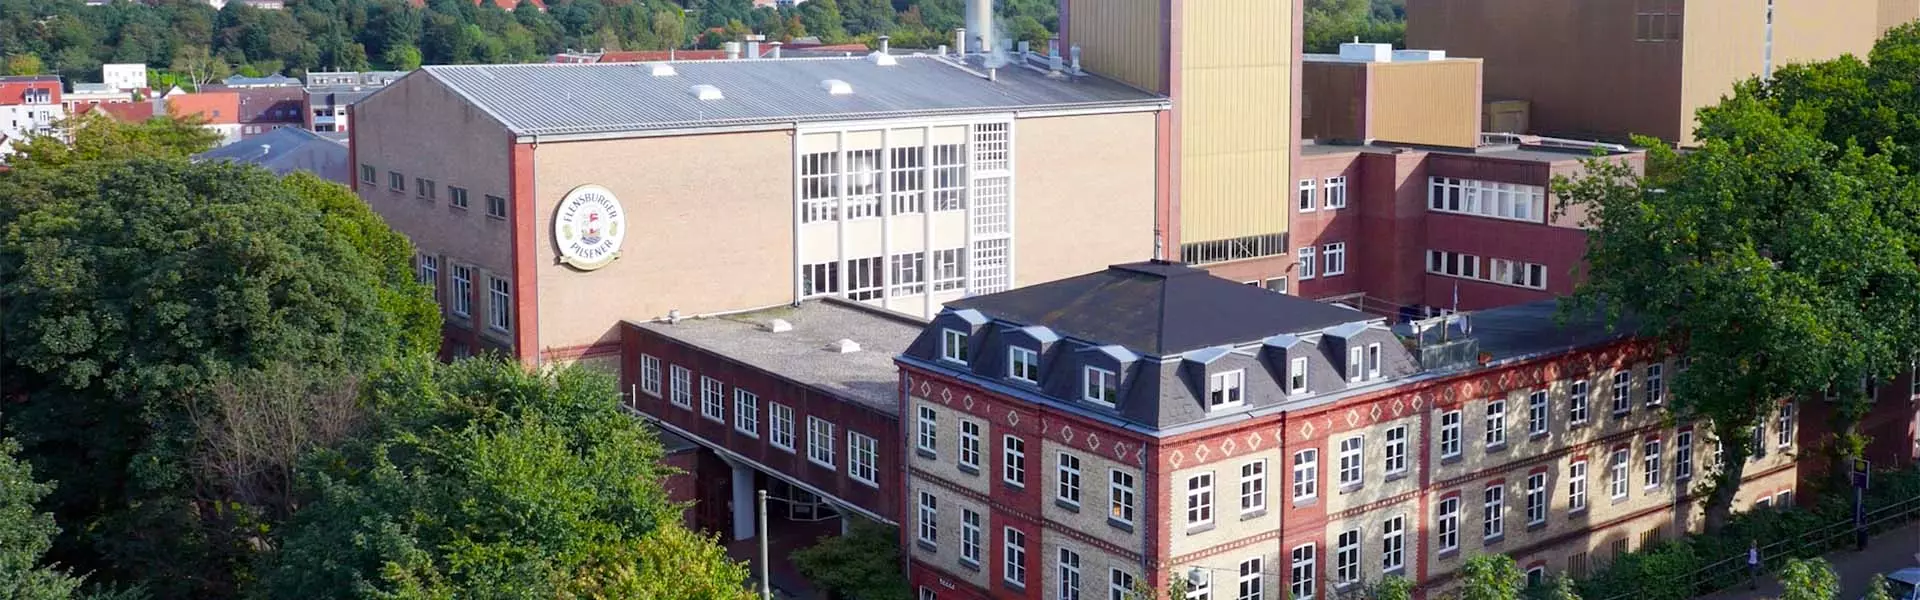 Building of the Flensburger Brewery